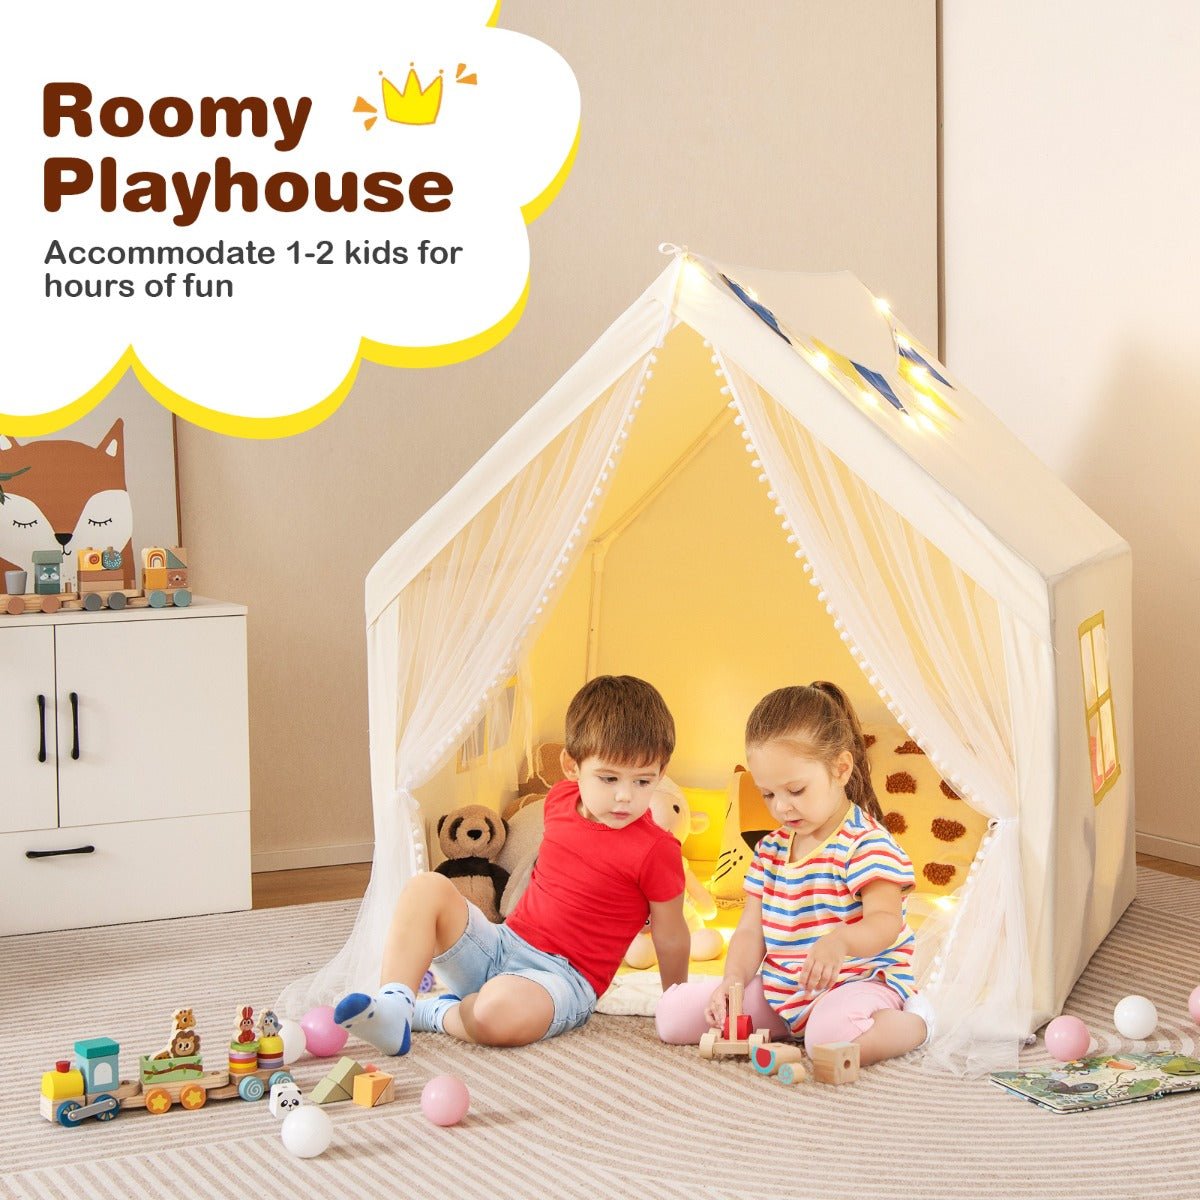 Beige Kids Play Tent with Cotton Mat and Star Lights - Kids Mega Mart